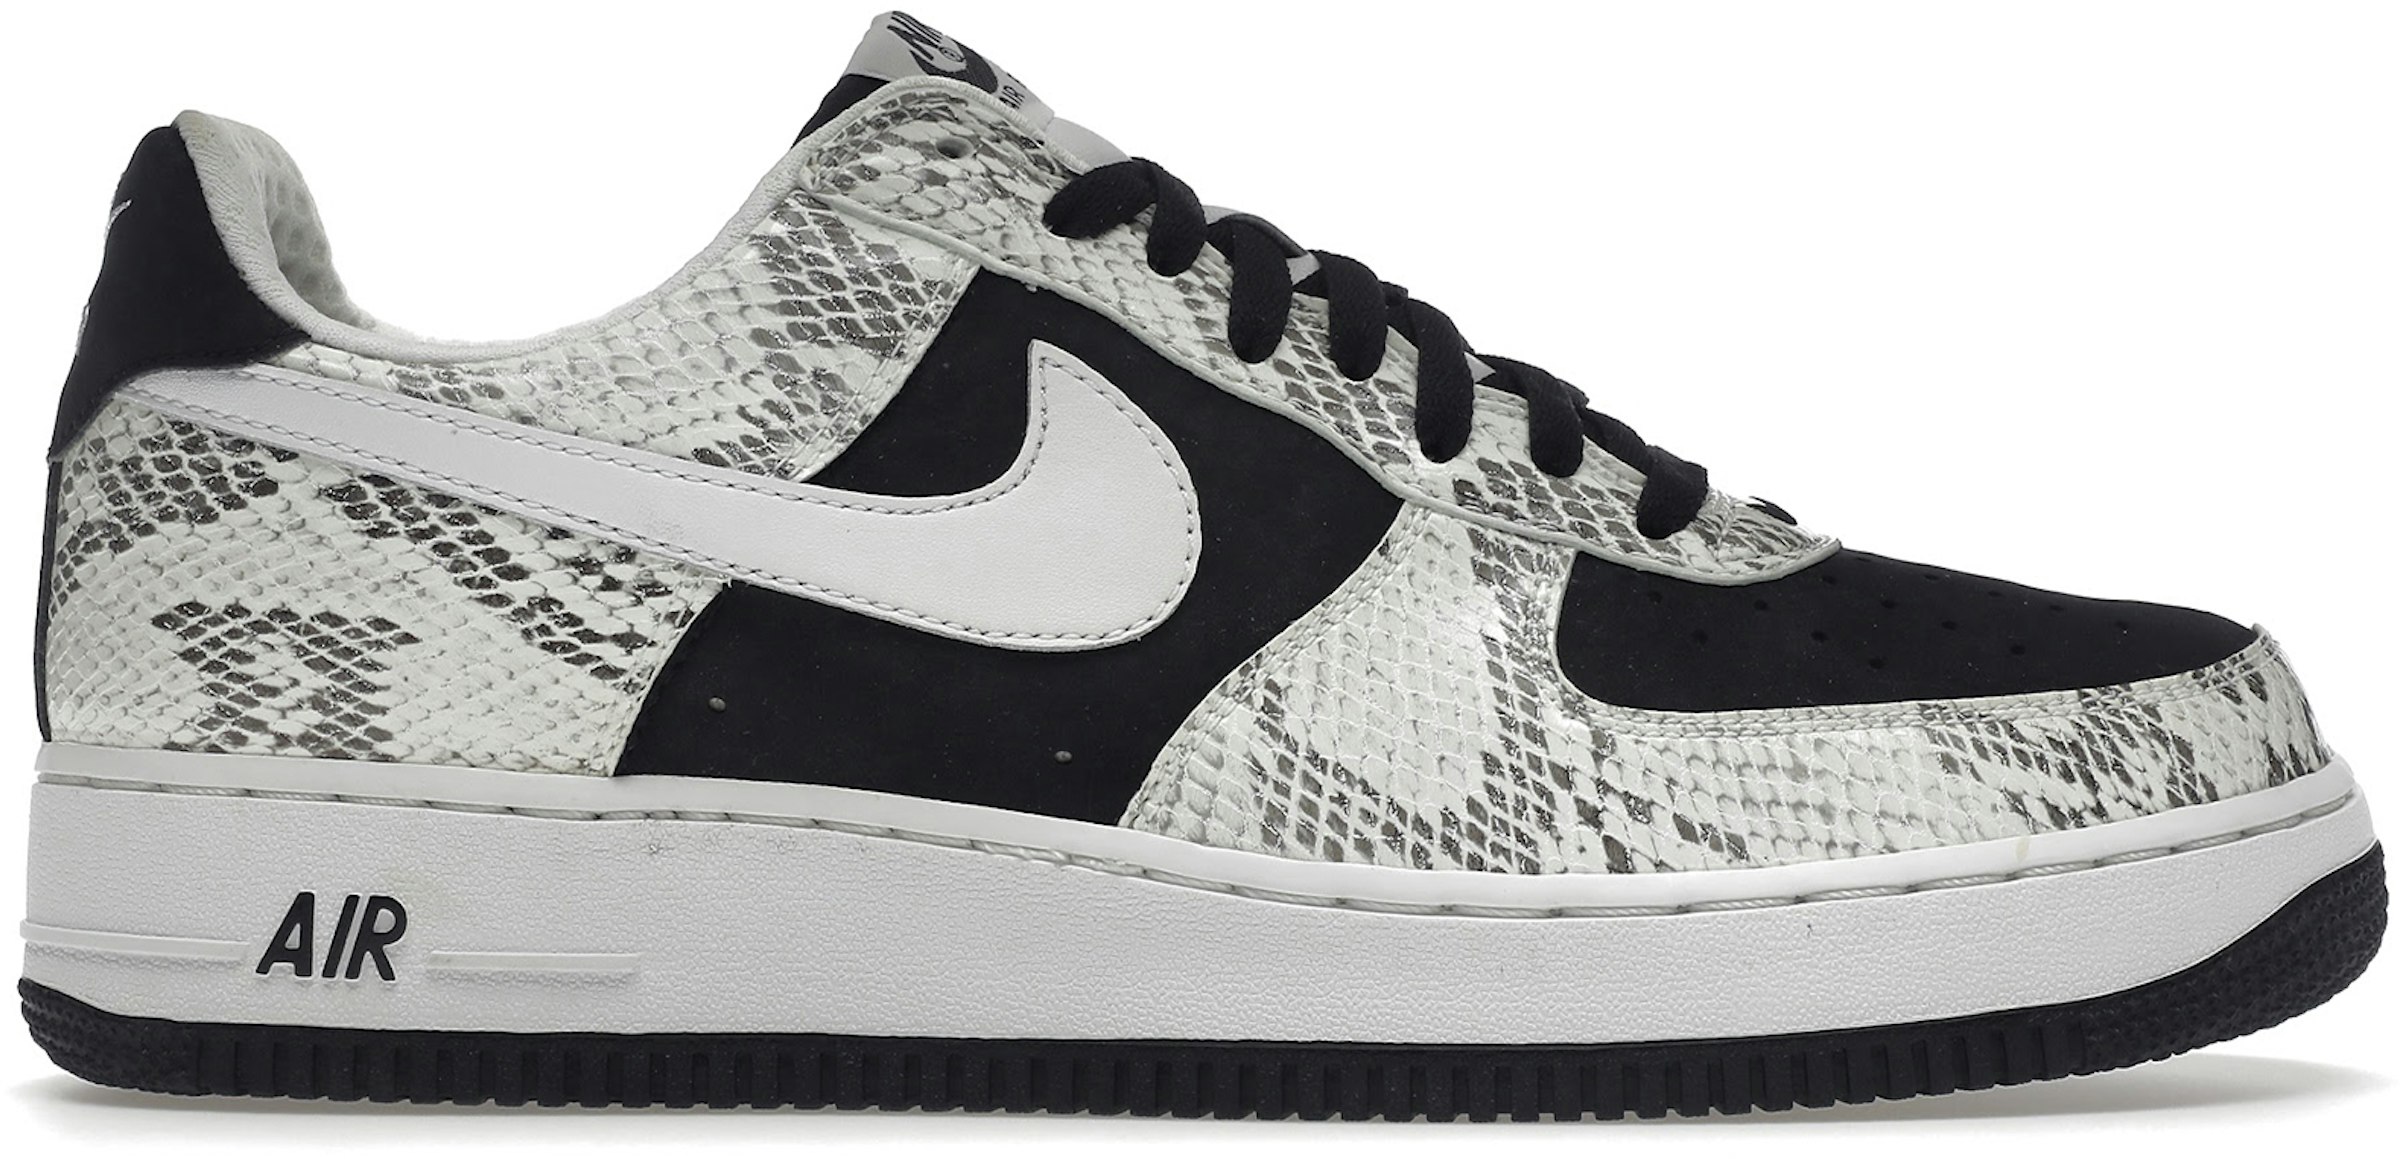 Air Force 1 Low Snakeskin Cocoa - 312945-011 - US